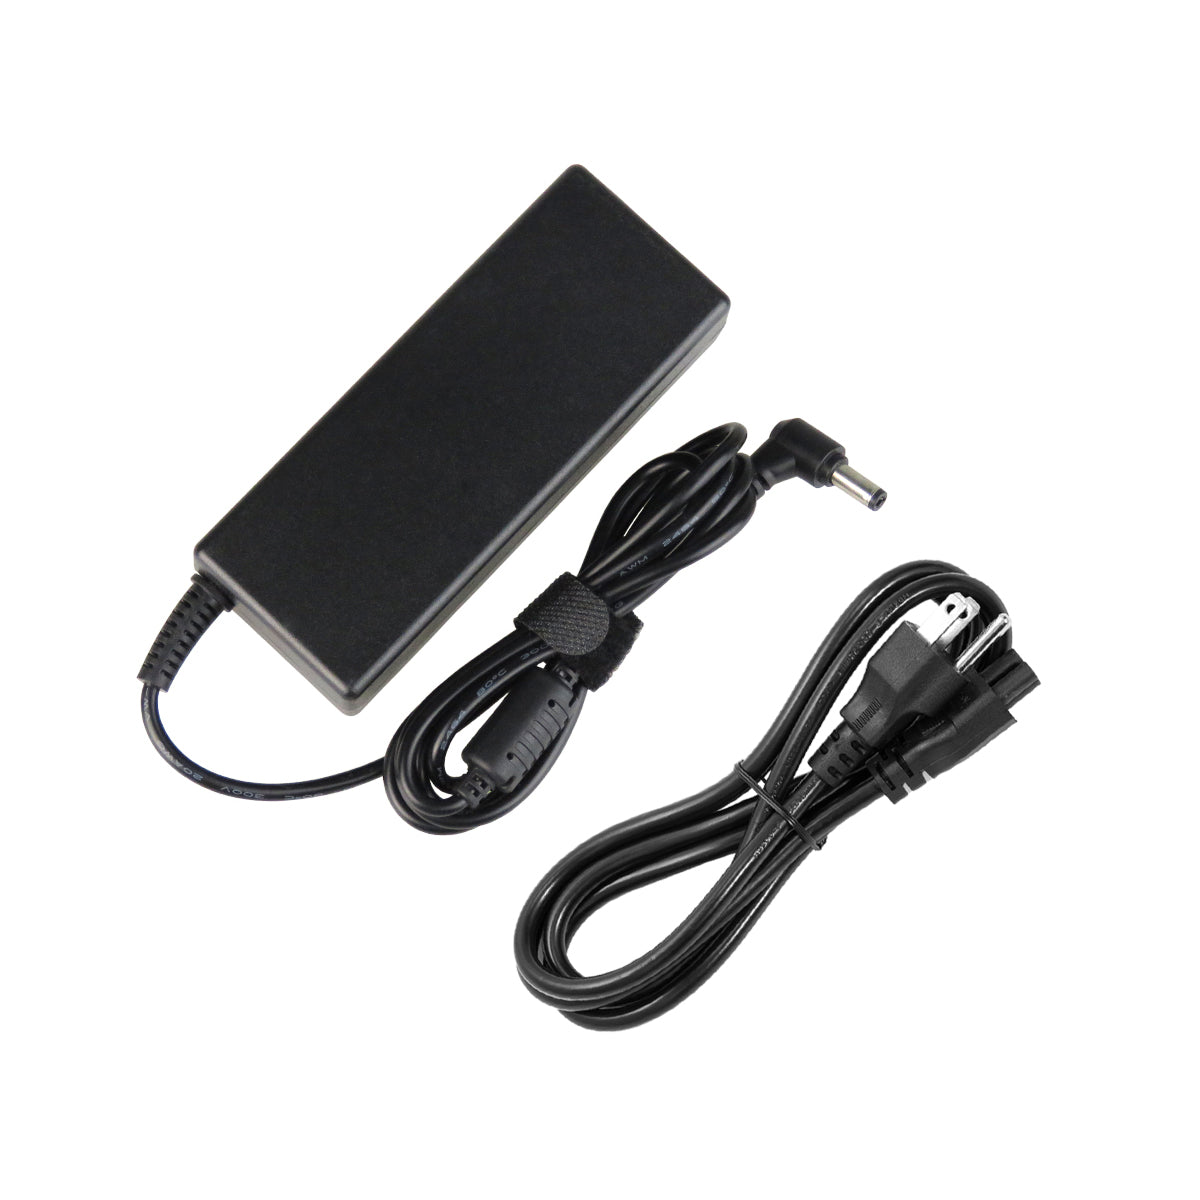 AC Adapter Charger for ASUS N81A Notebook.